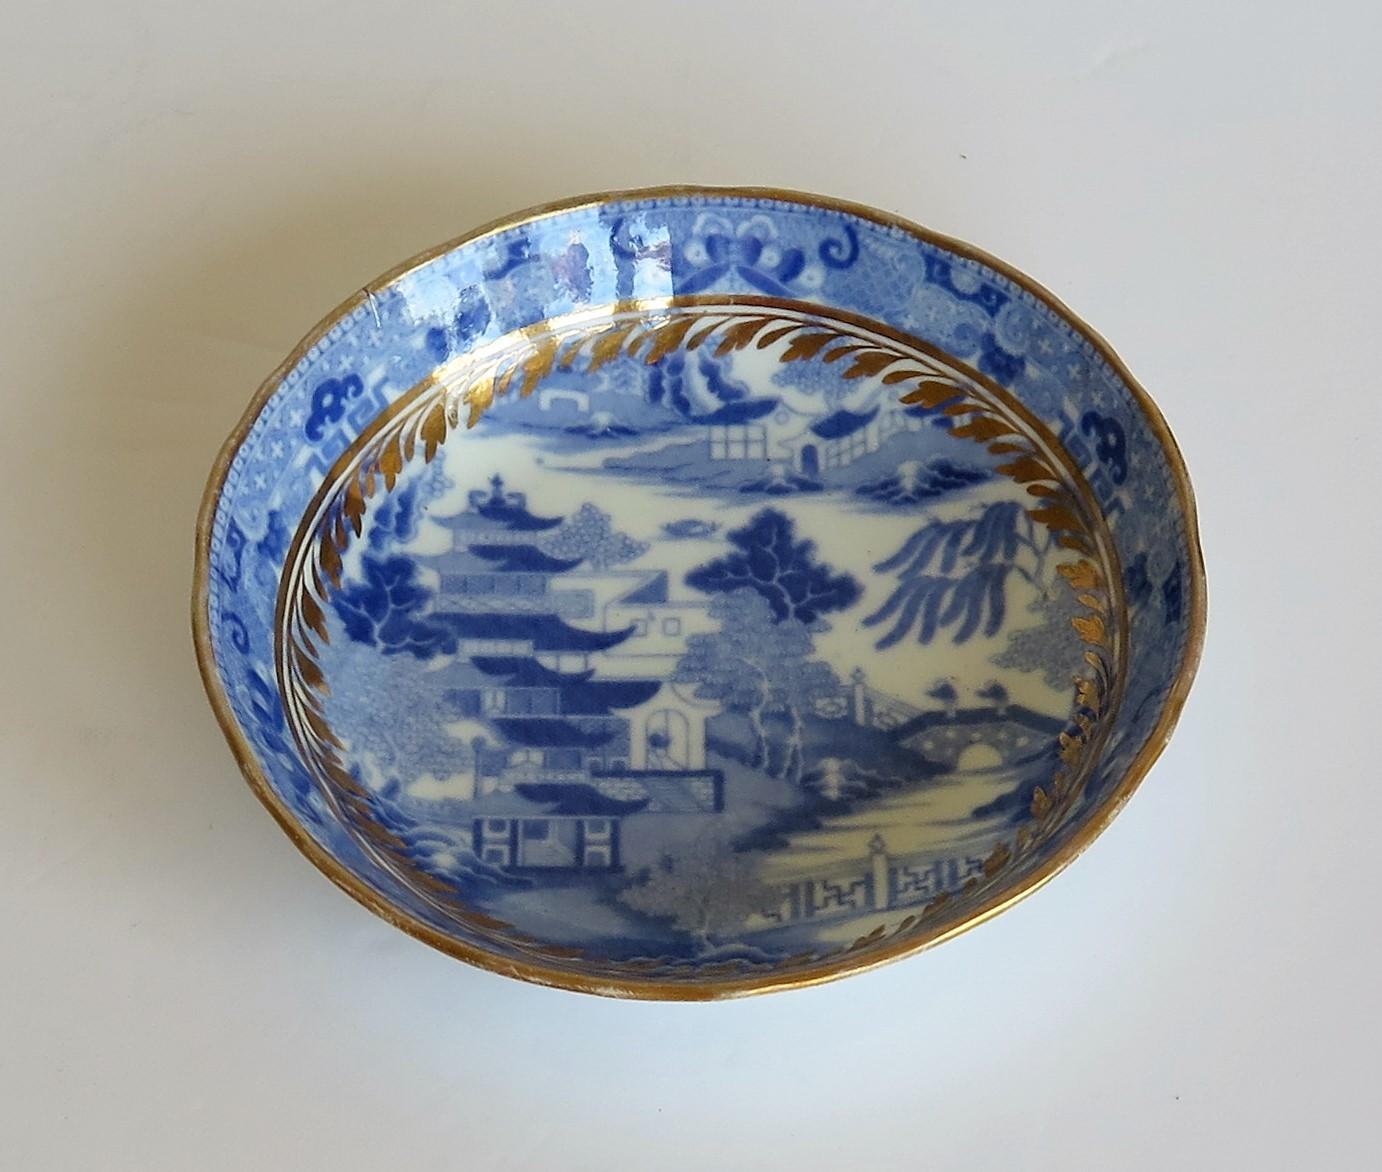 Miles Mason Porcelain Saucer Dish Blue and White Gilded Broseley Pattern Ca 1805 2